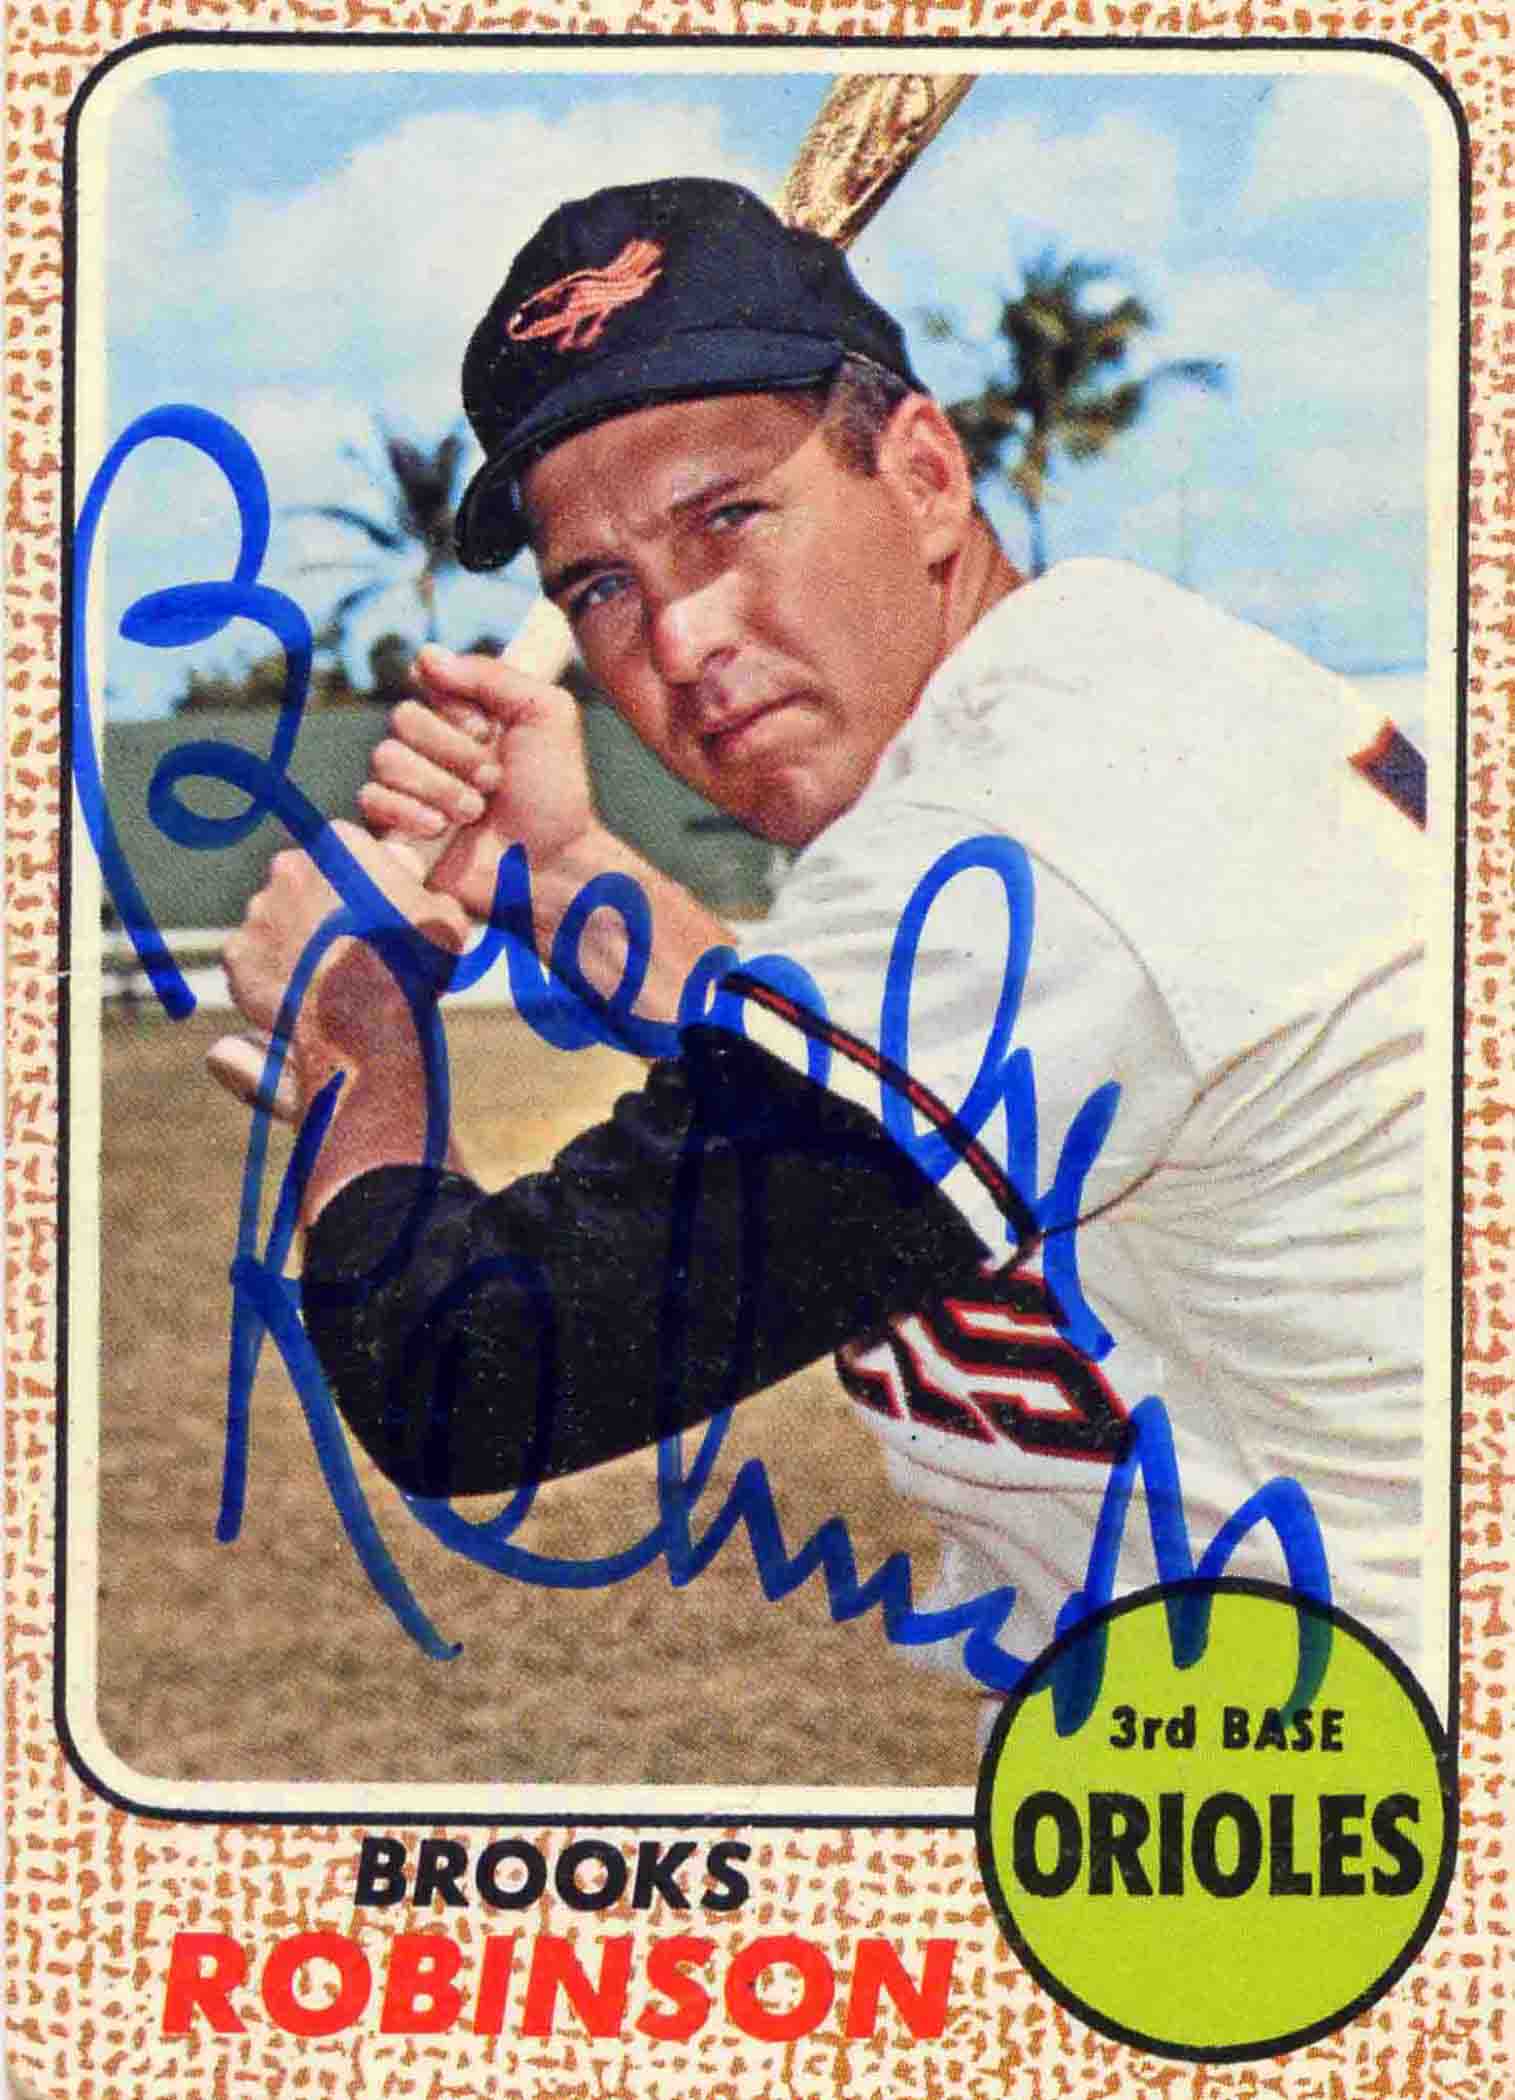 1968 Topps Autographed